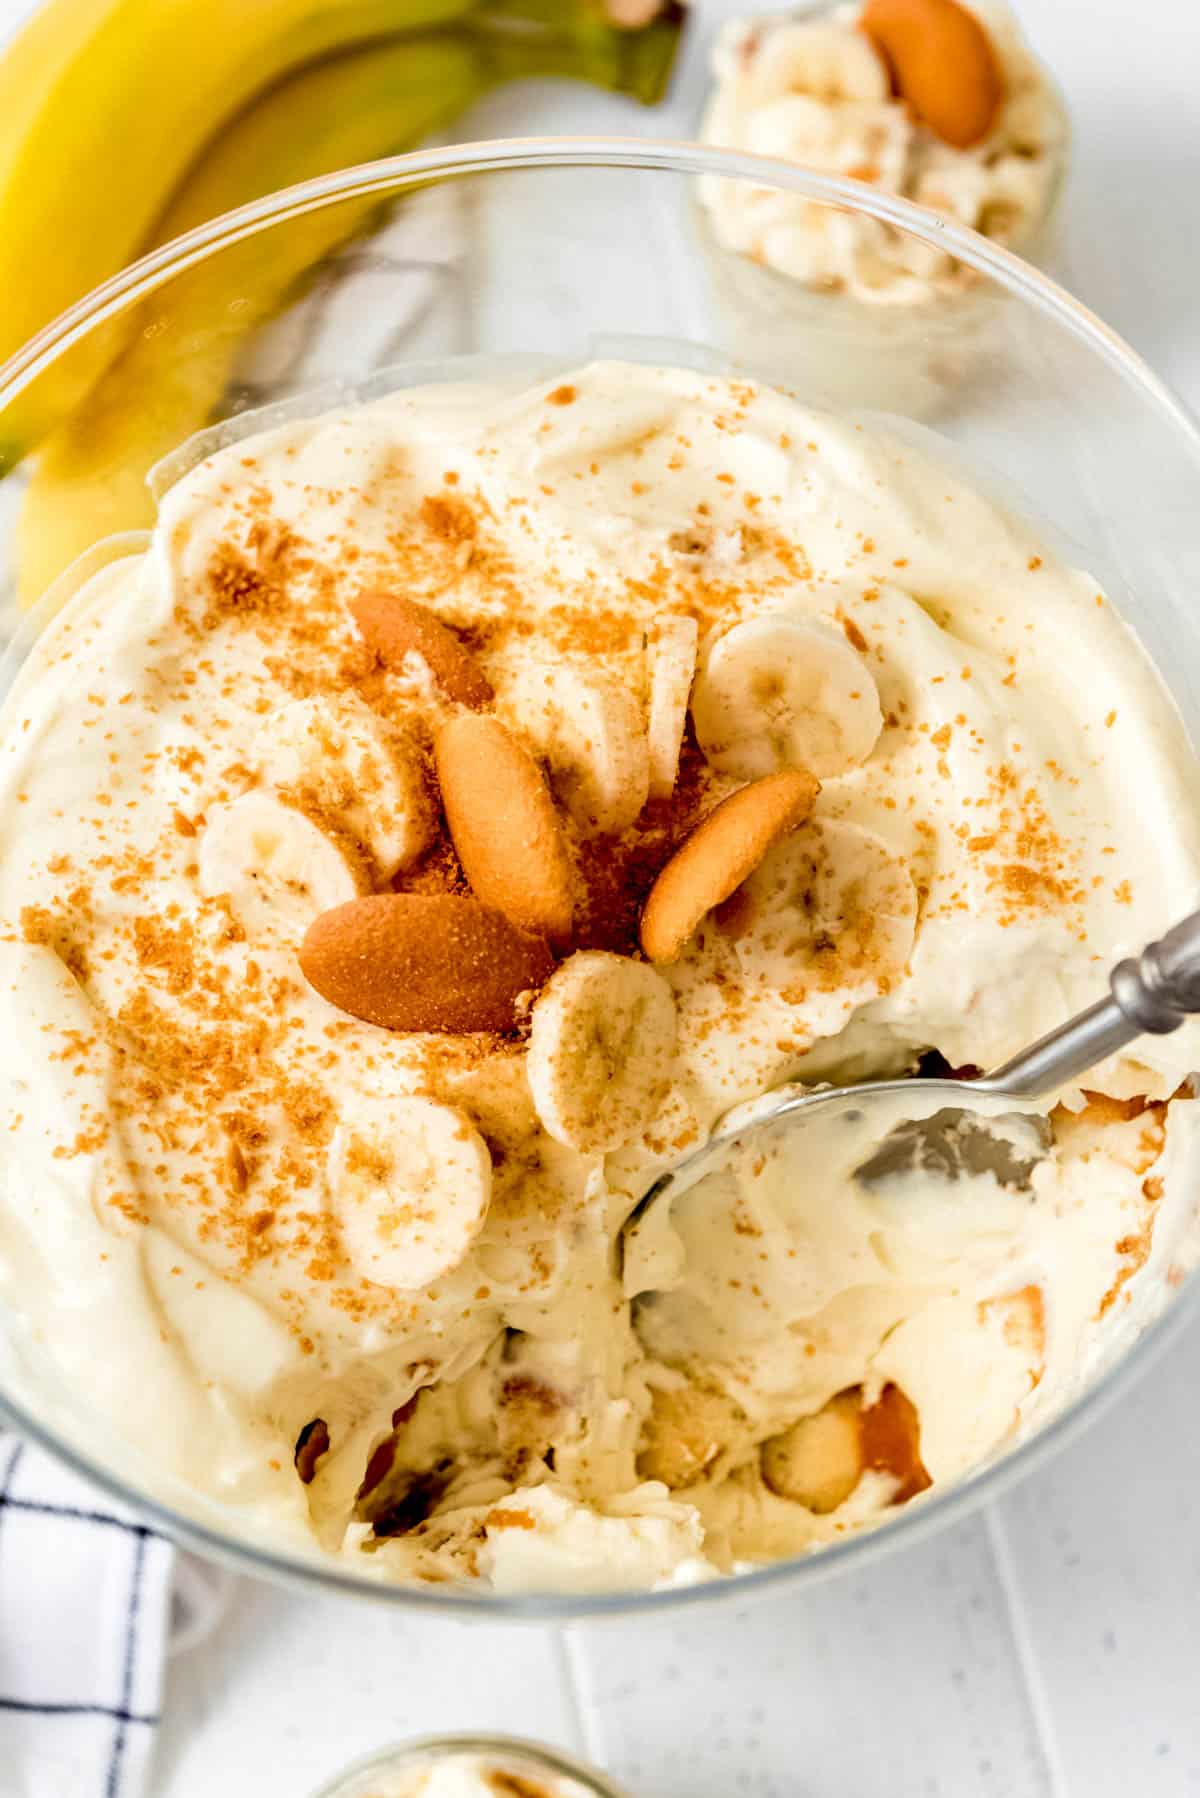 Taking a scoop out of magnolia bakery banana pudding with a silver spoon